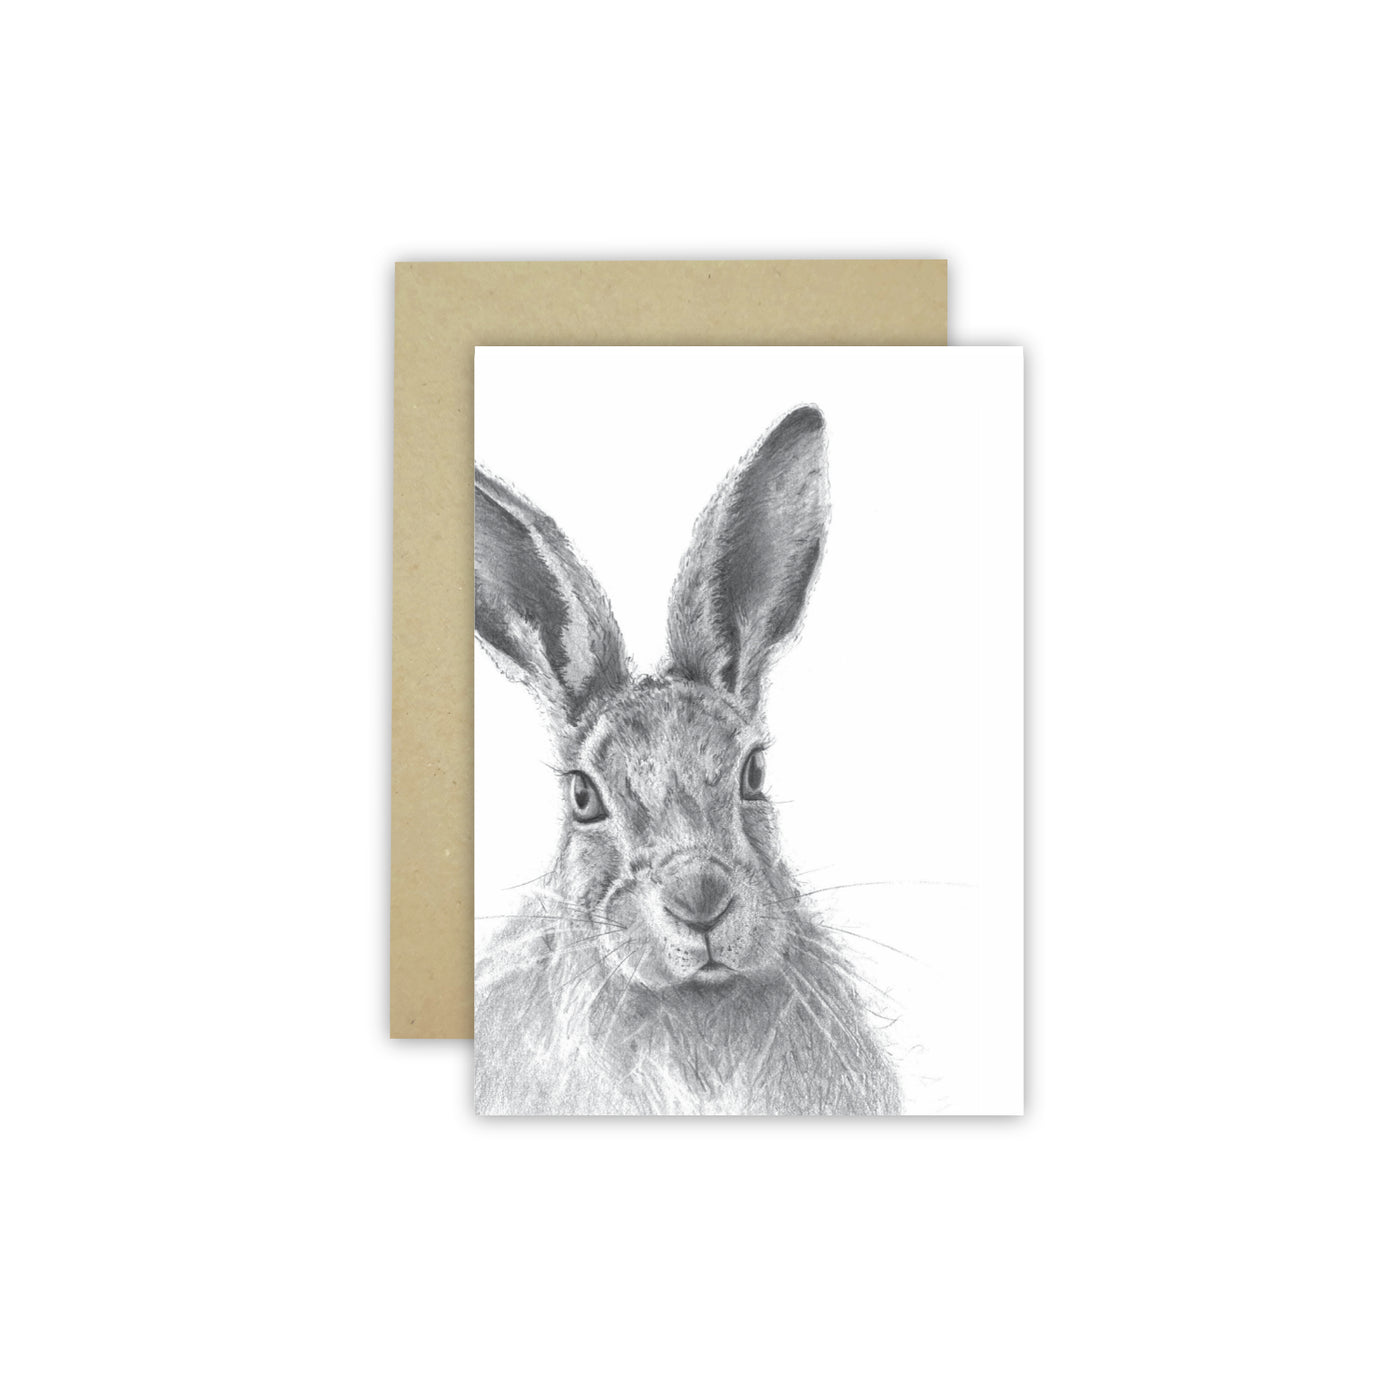 Hare C6 Card - Wholesale - NEW SIZE